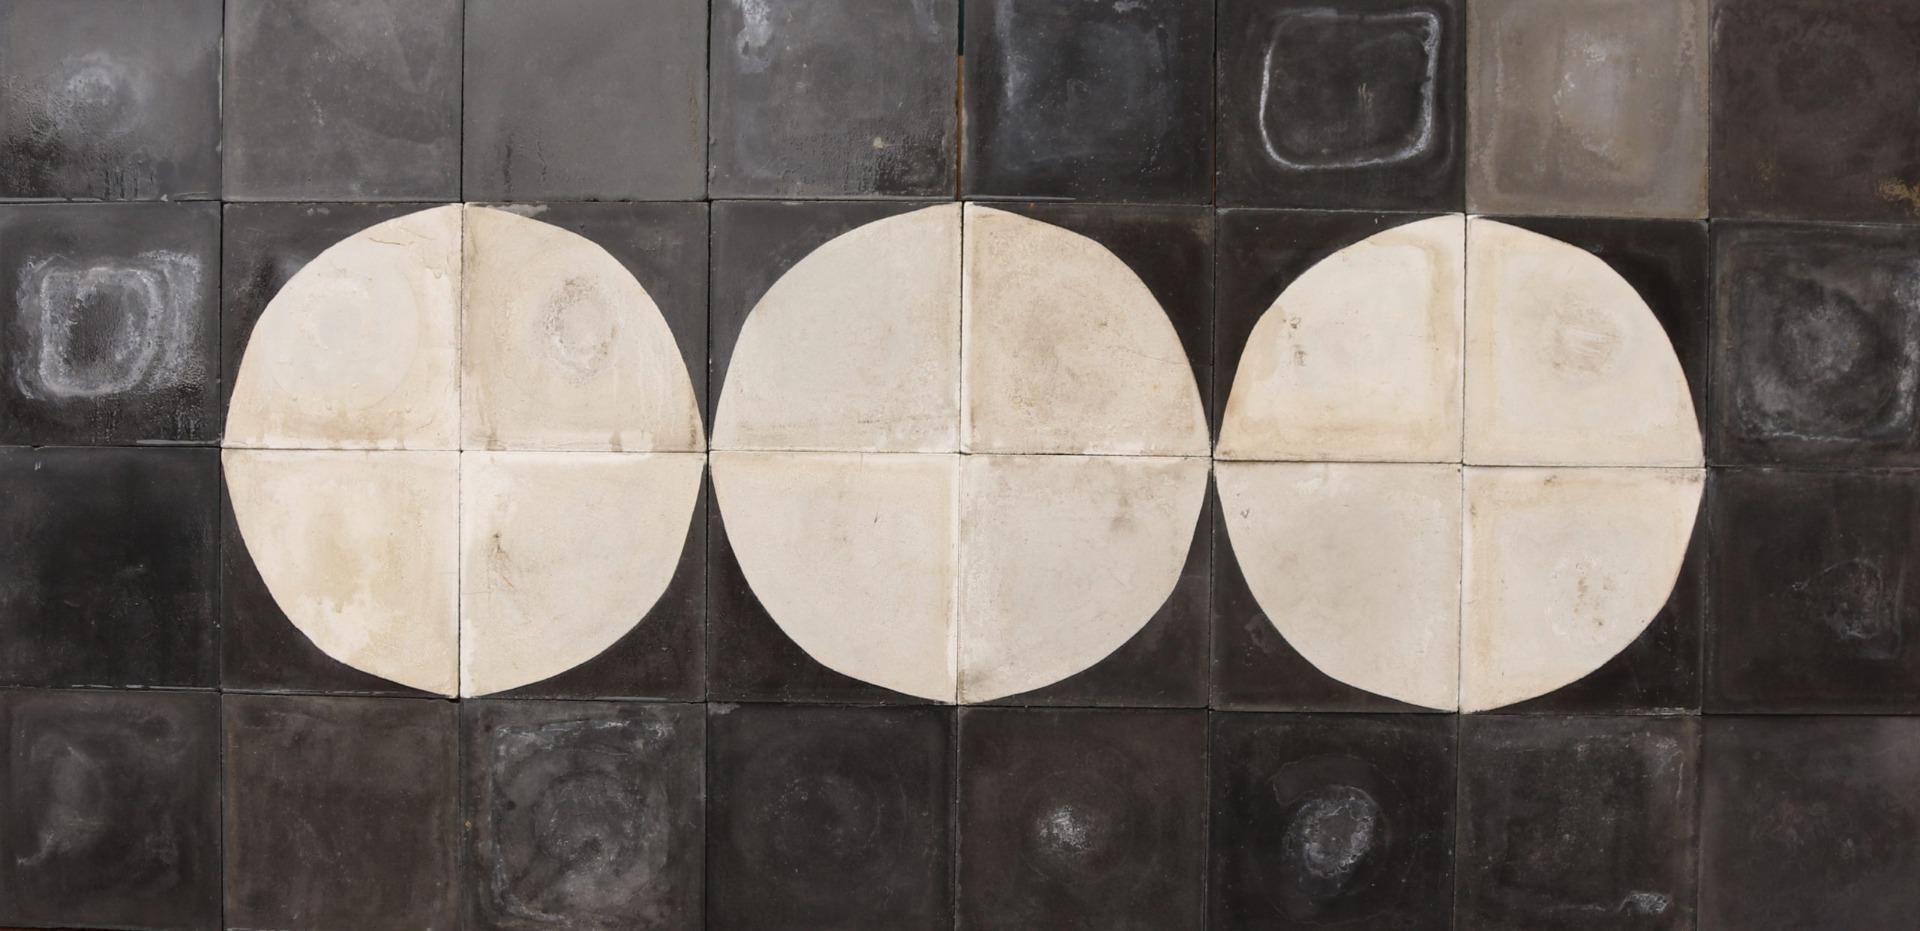 A batch of 37 reclaimed encaustic cement tiles with a black and white circle pattern. These tiles will cover 1.4 m2 or 15 ft2. Suitable for wall or floors. This would make a great kitchen or bathroom splash-back.

Weathered surfaces and small